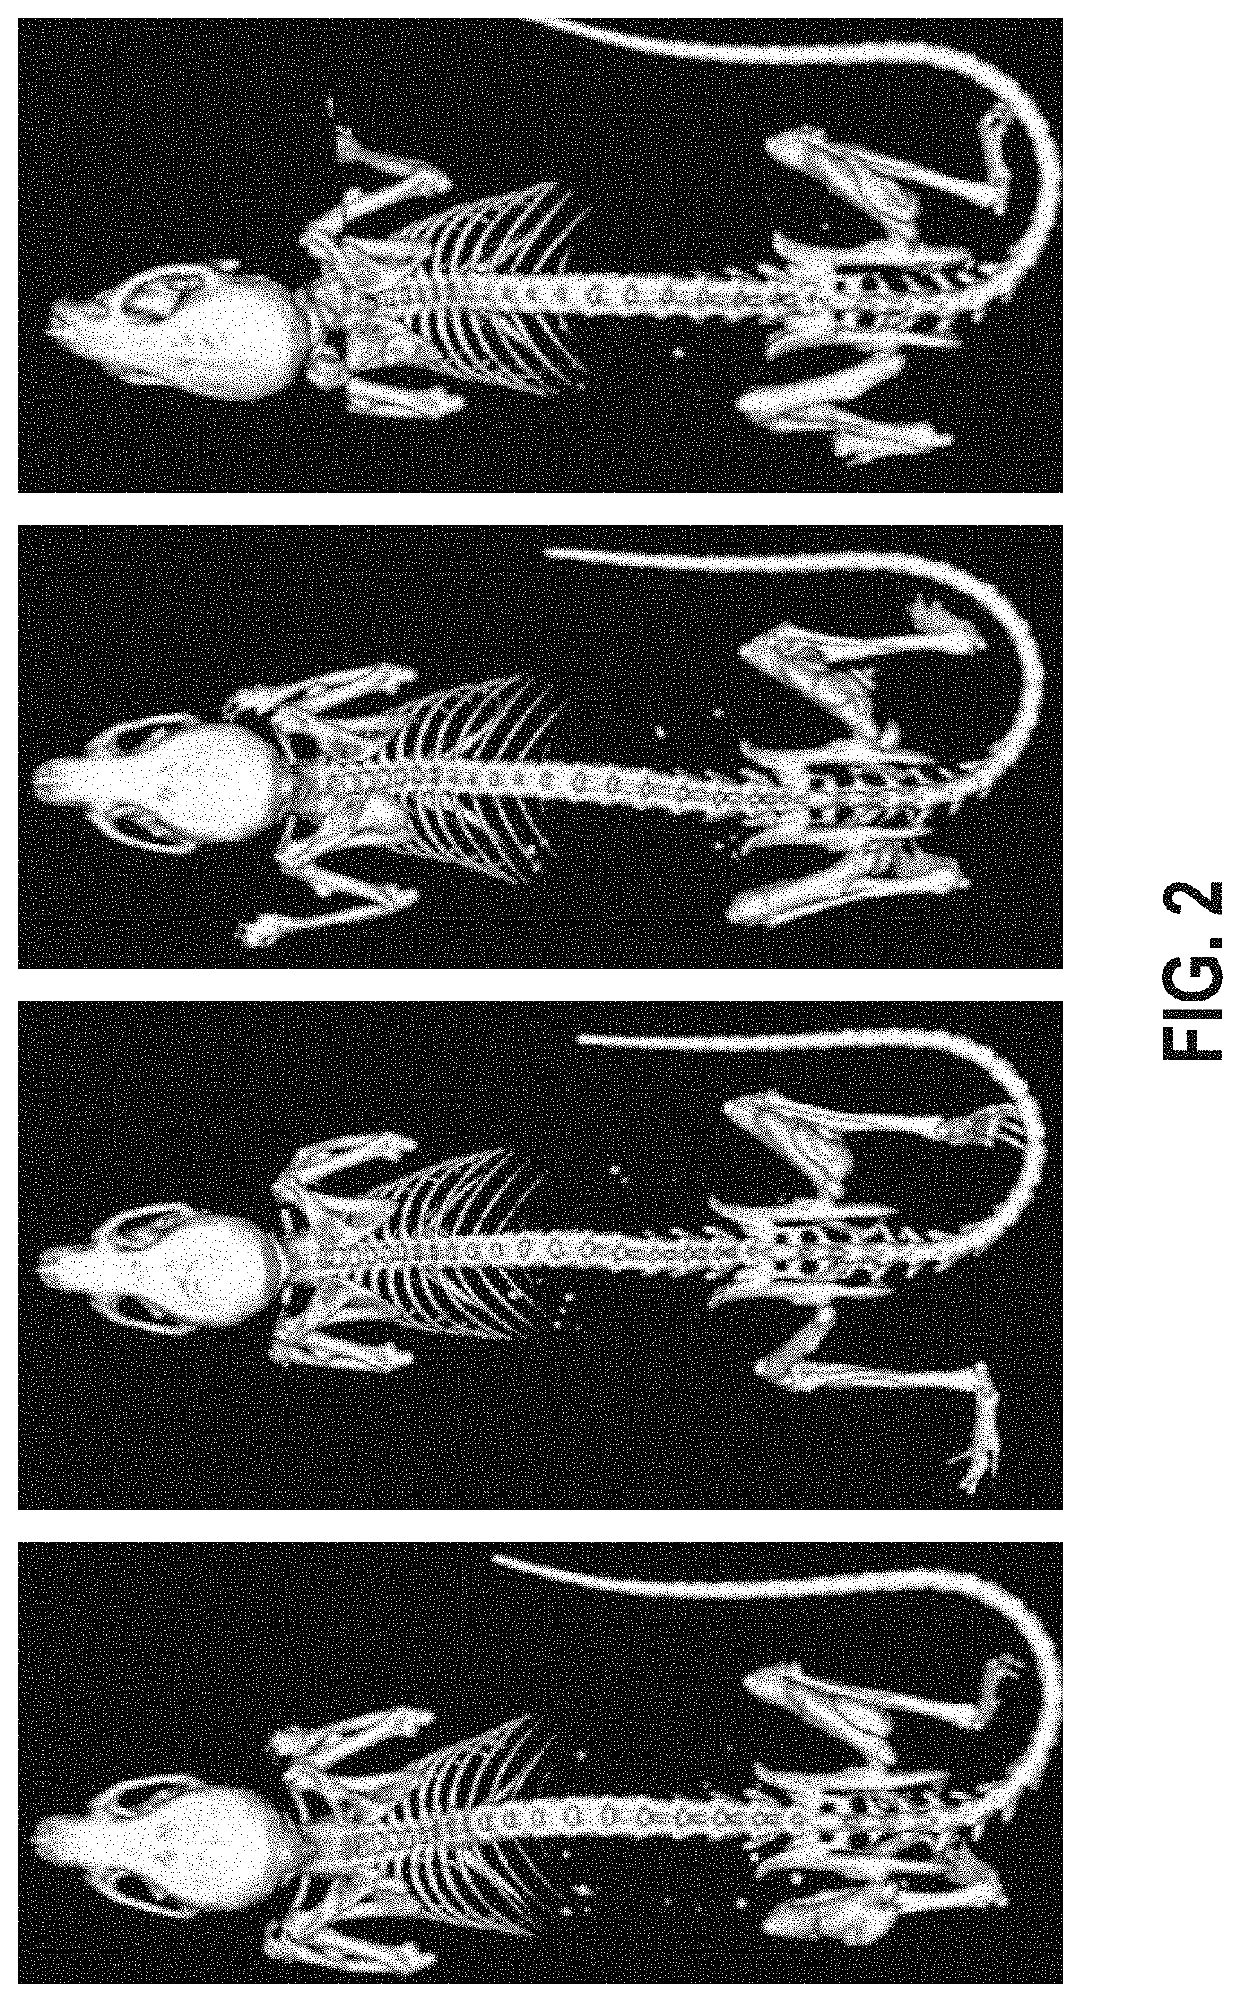 Genetically modified rodent with an inducible ACVR1 mutation in exon 7 that causes ectopic bone formation